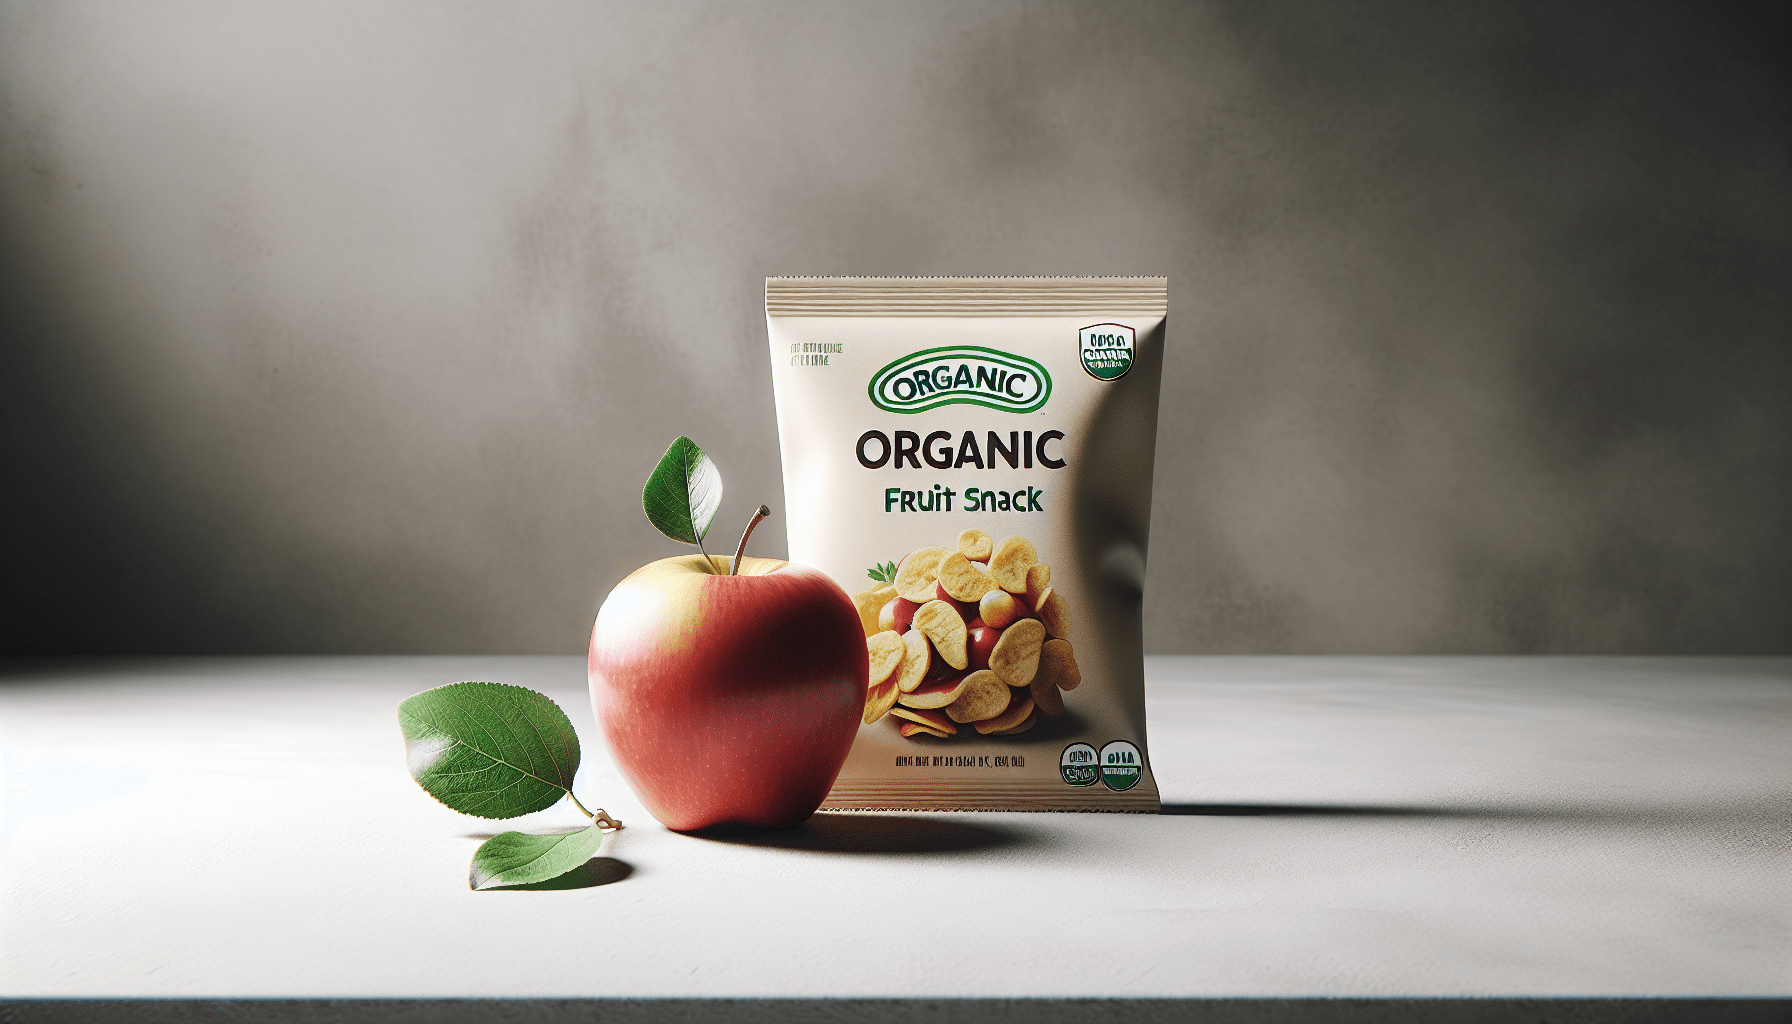 Are Organic Processed Foods Truly Healthier?